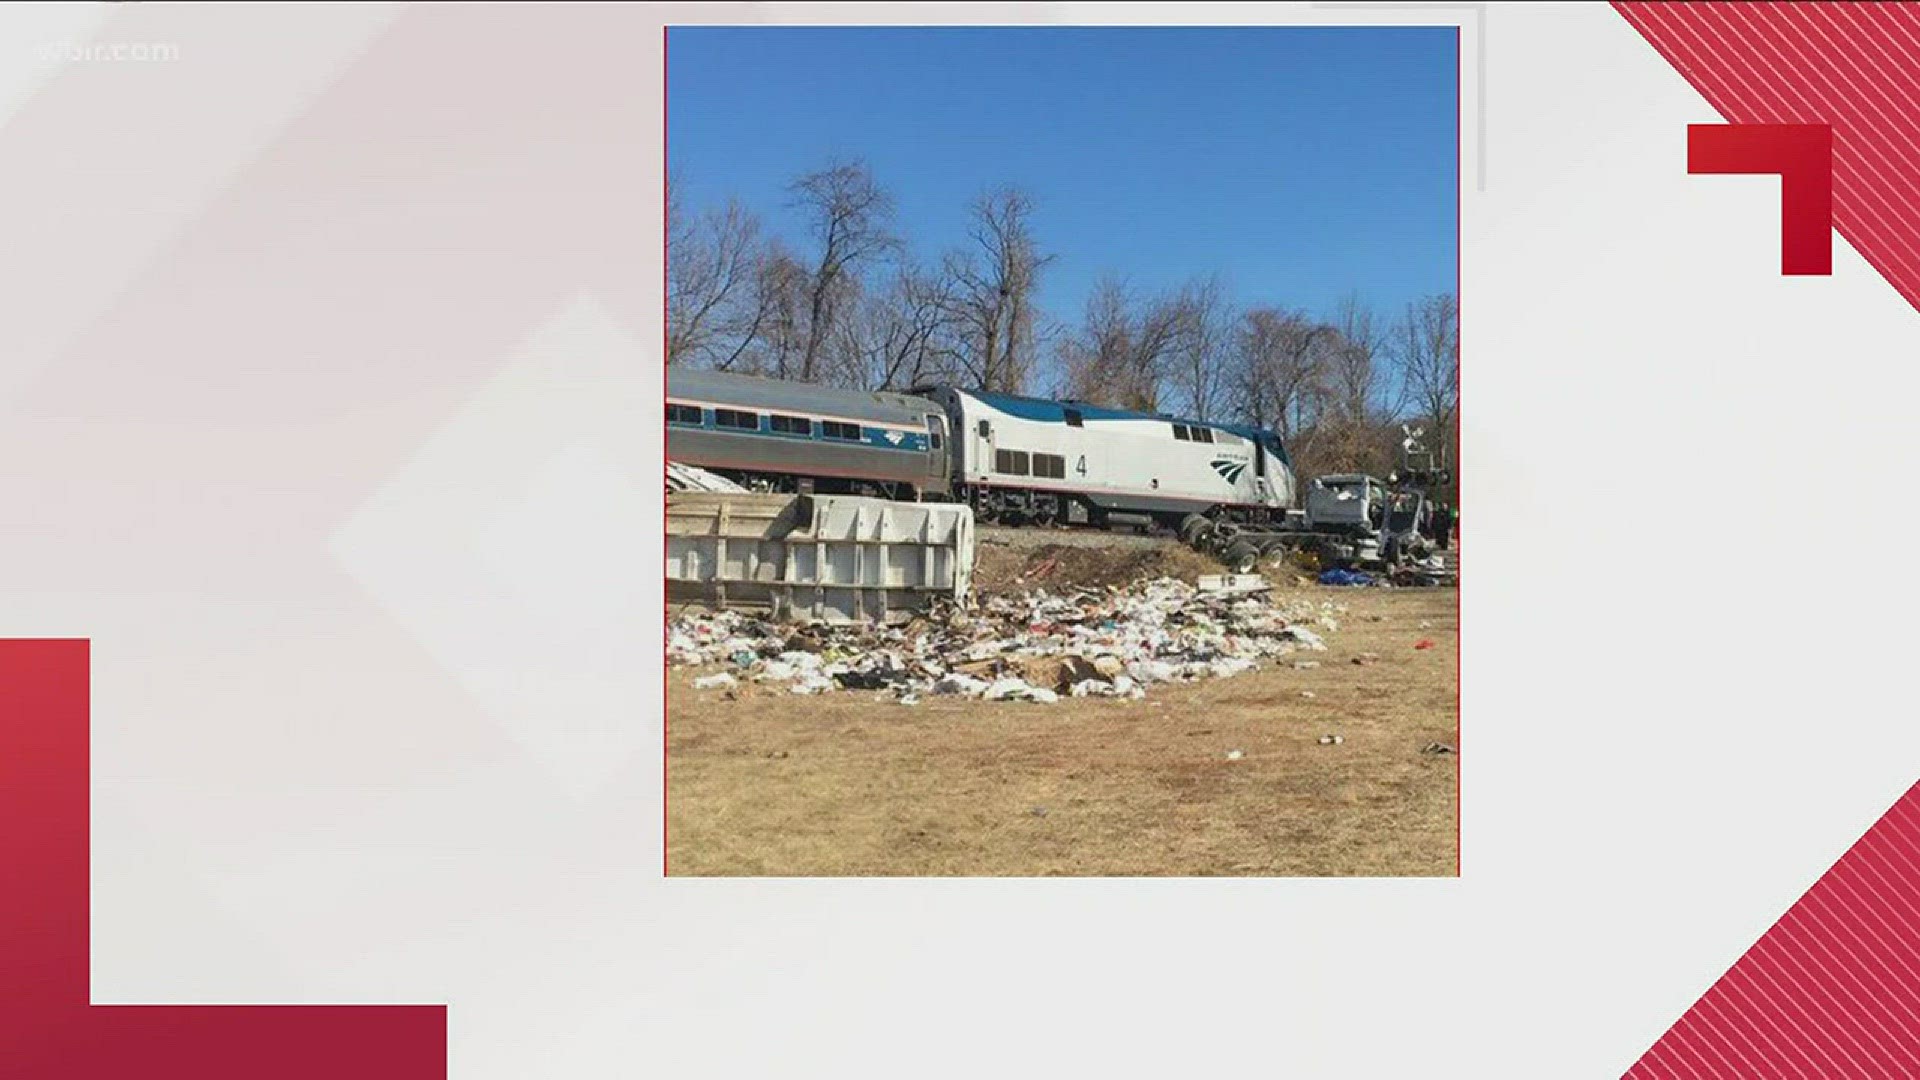 At least two lawmakers from Tennessee were on a train that collided with a dump truck this morning near Charlottesville, Virginia.